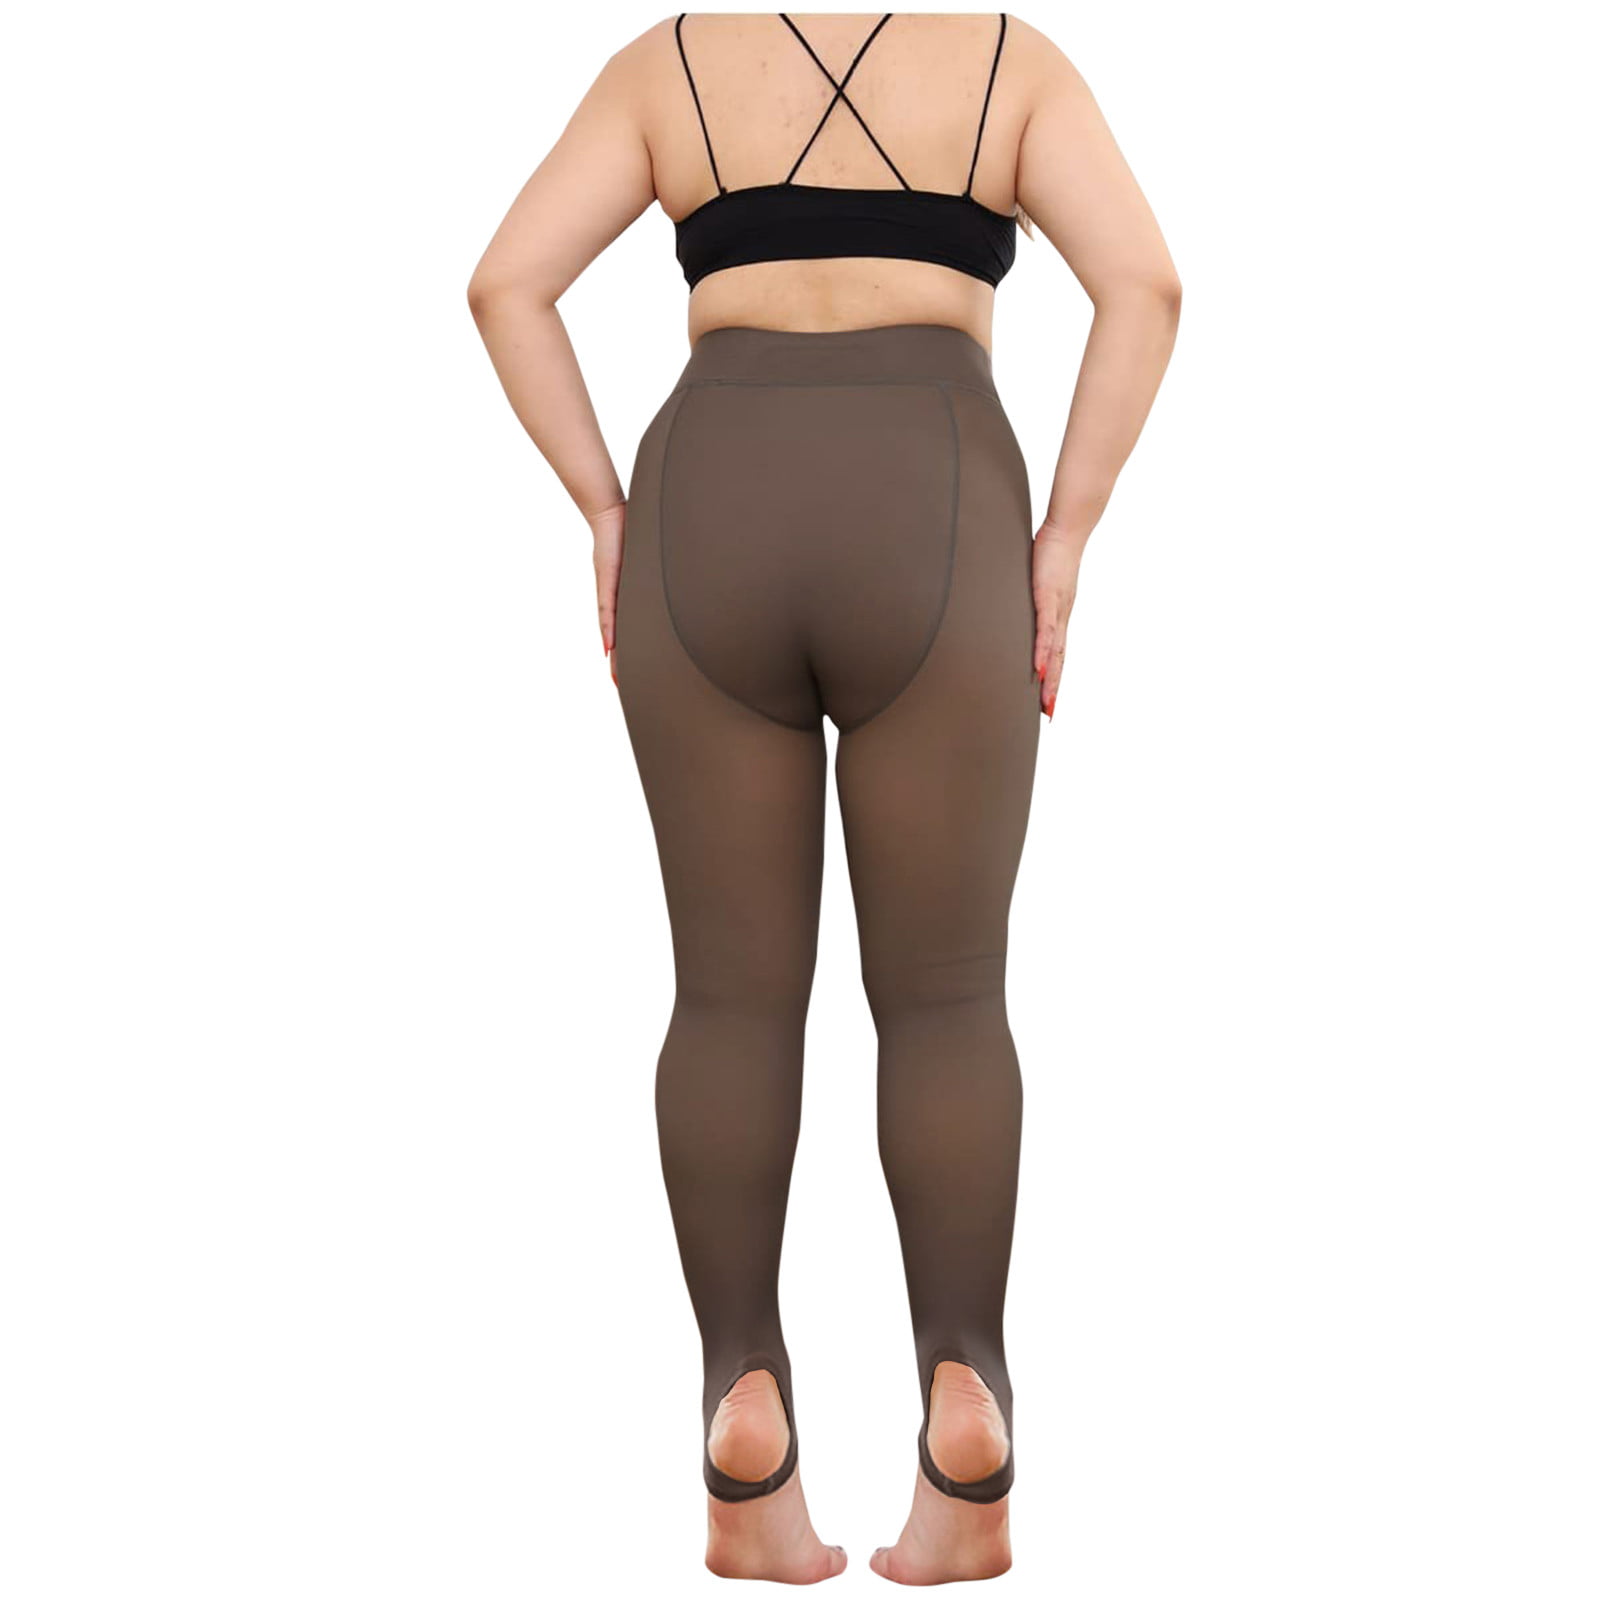 1pc Plus Size Sheer Pantyhose, Tights For Tall Women, Slimming Compression  Leggings As Autumn Underwear